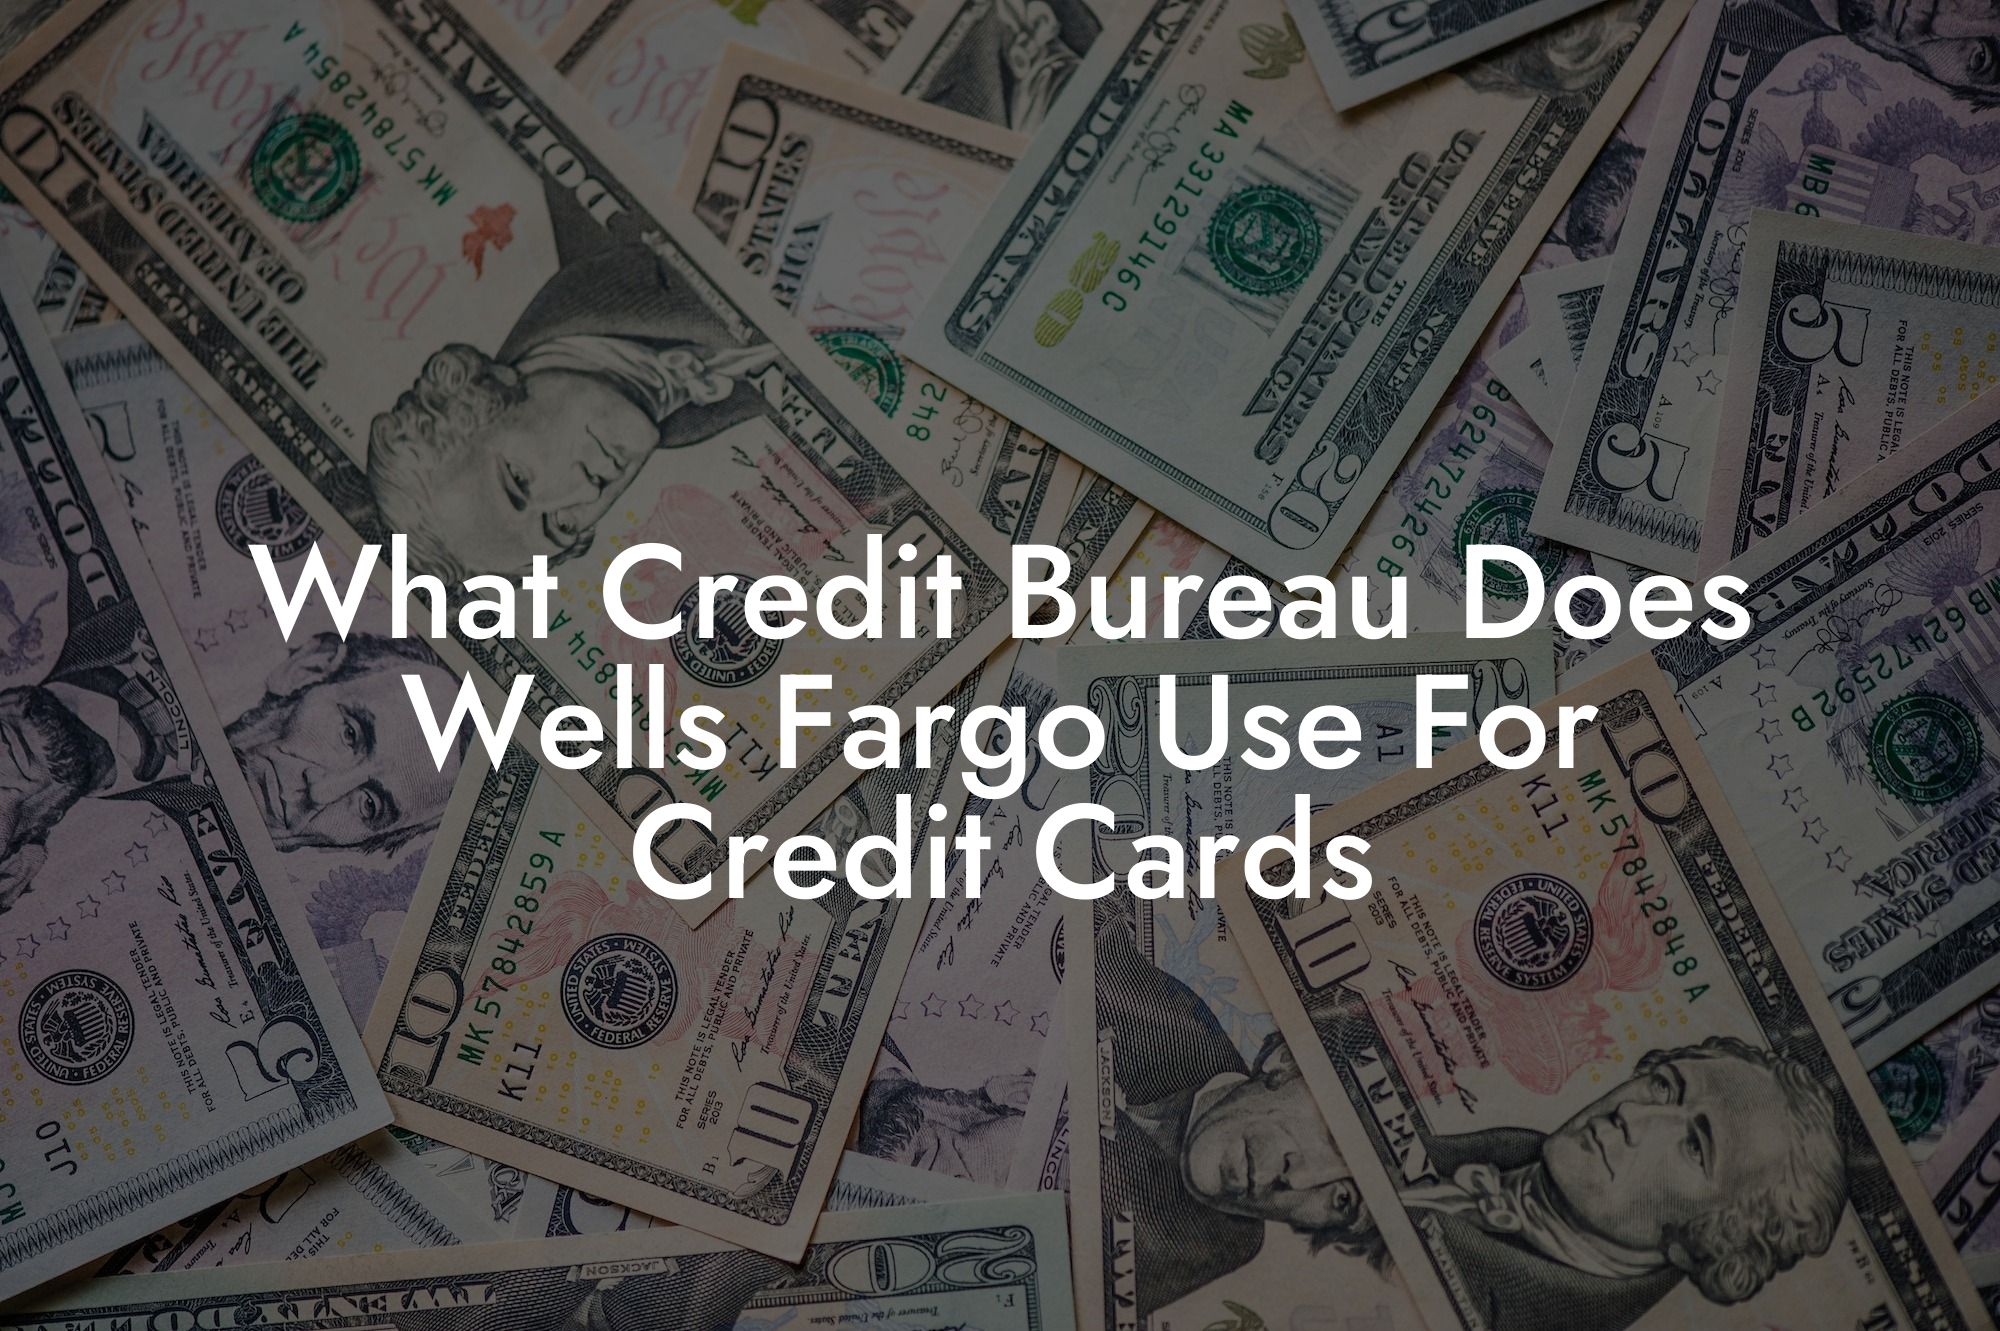 What Credit Bureau Does Wells Fargo Use For Credit Cards